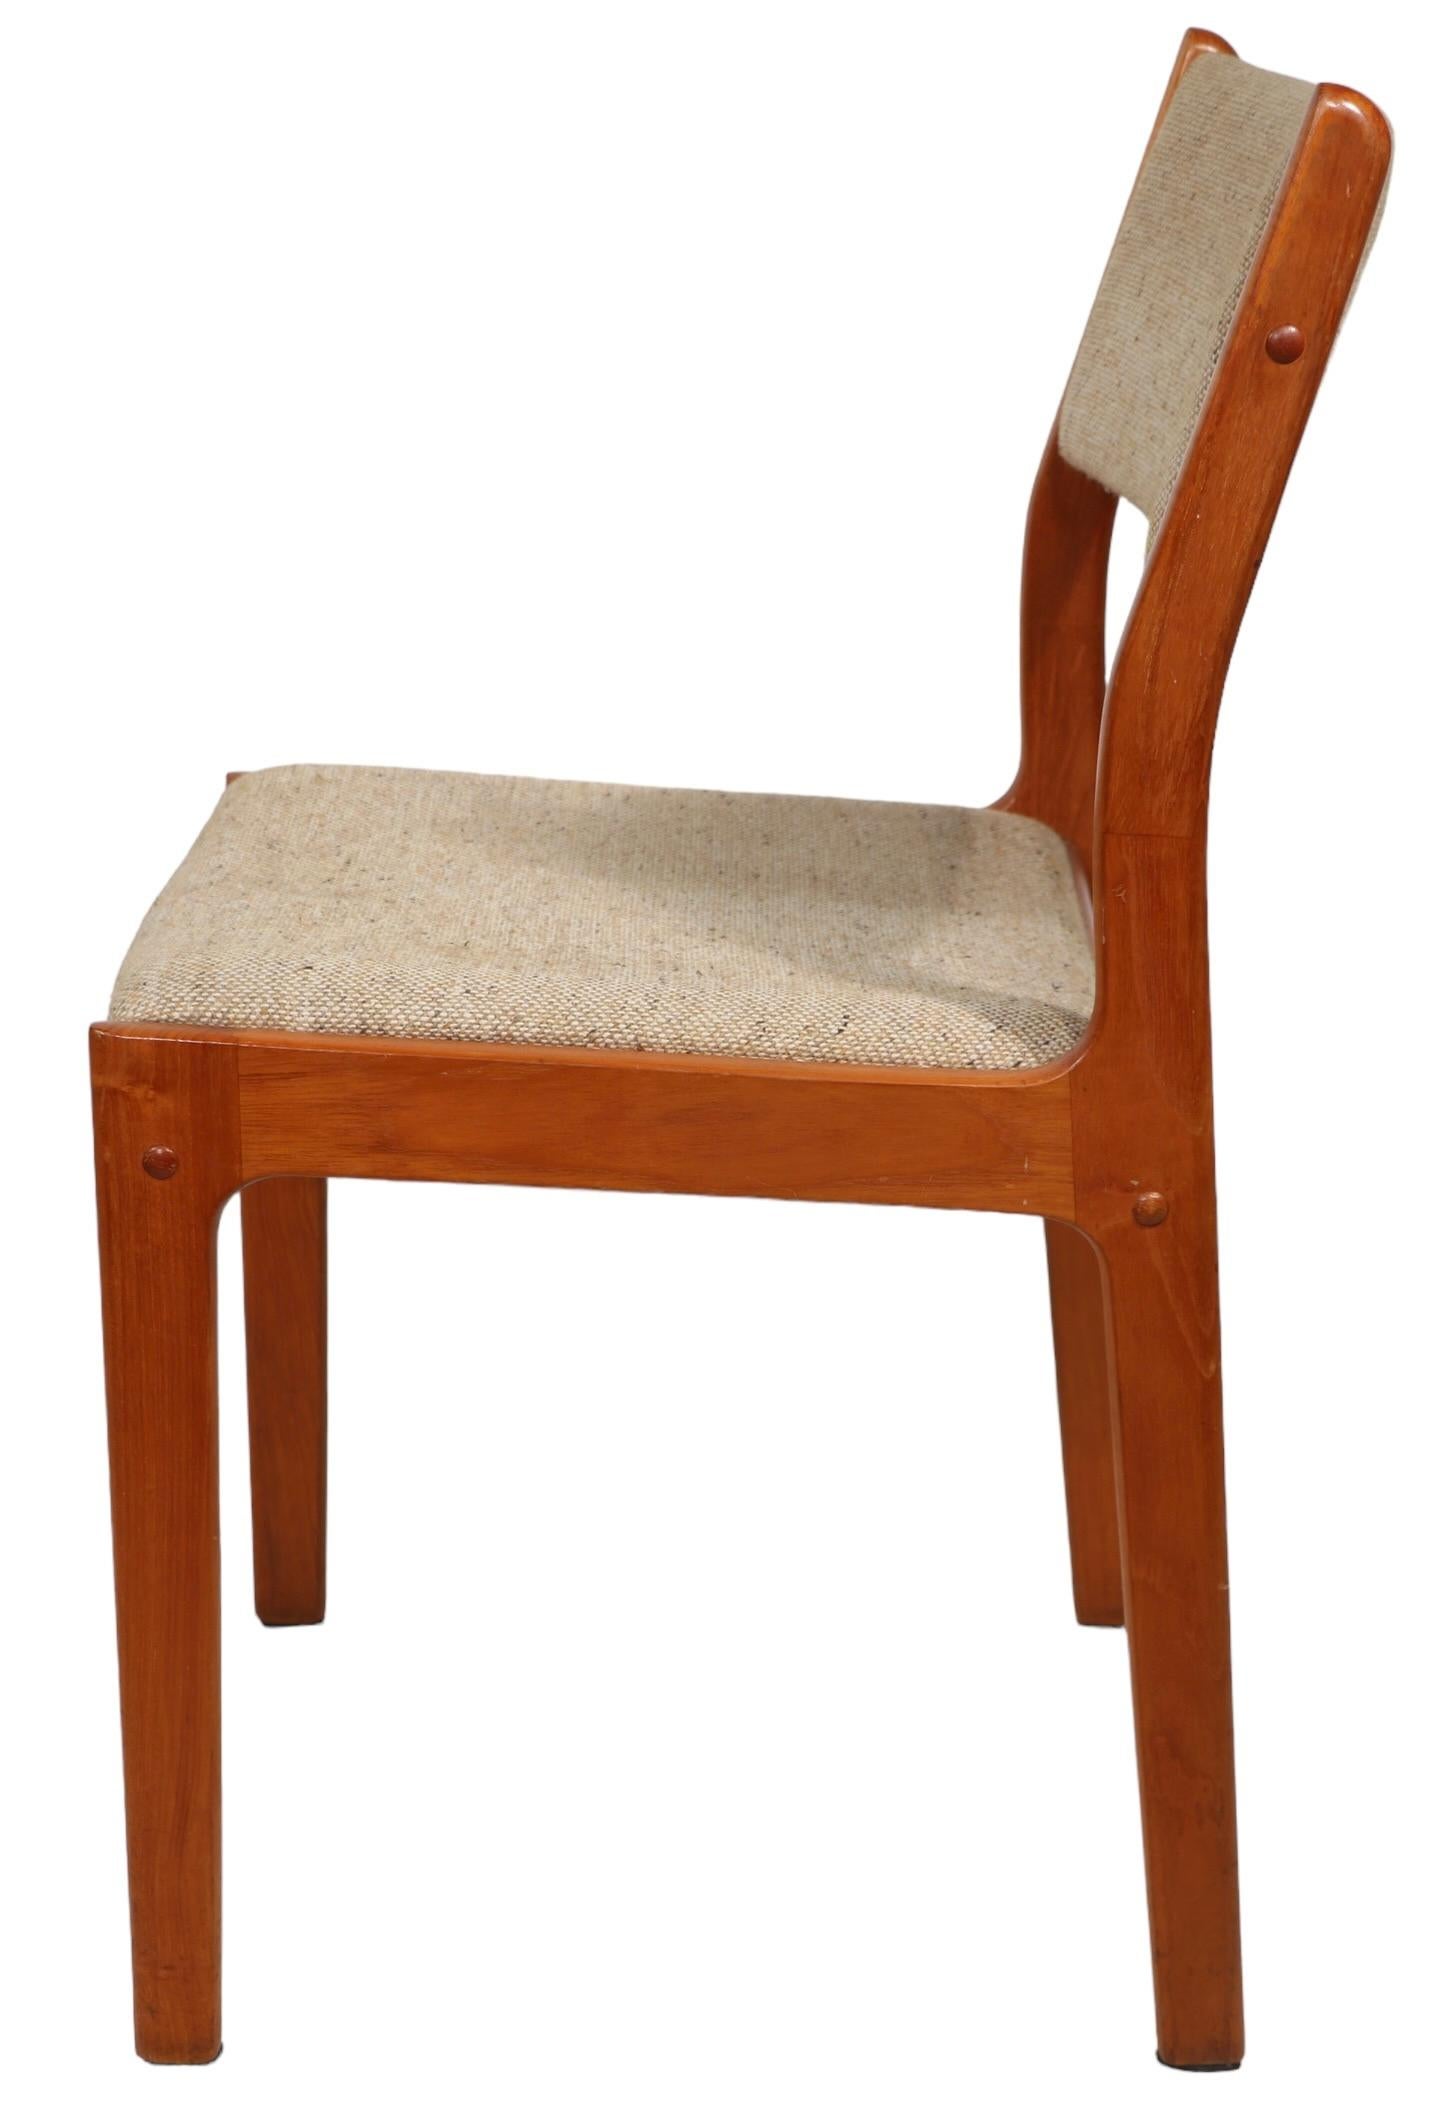 Upholstery Four Teak  Danish Style Mid Century Dining Chairs by D Scan c 1950/1960's  For Sale